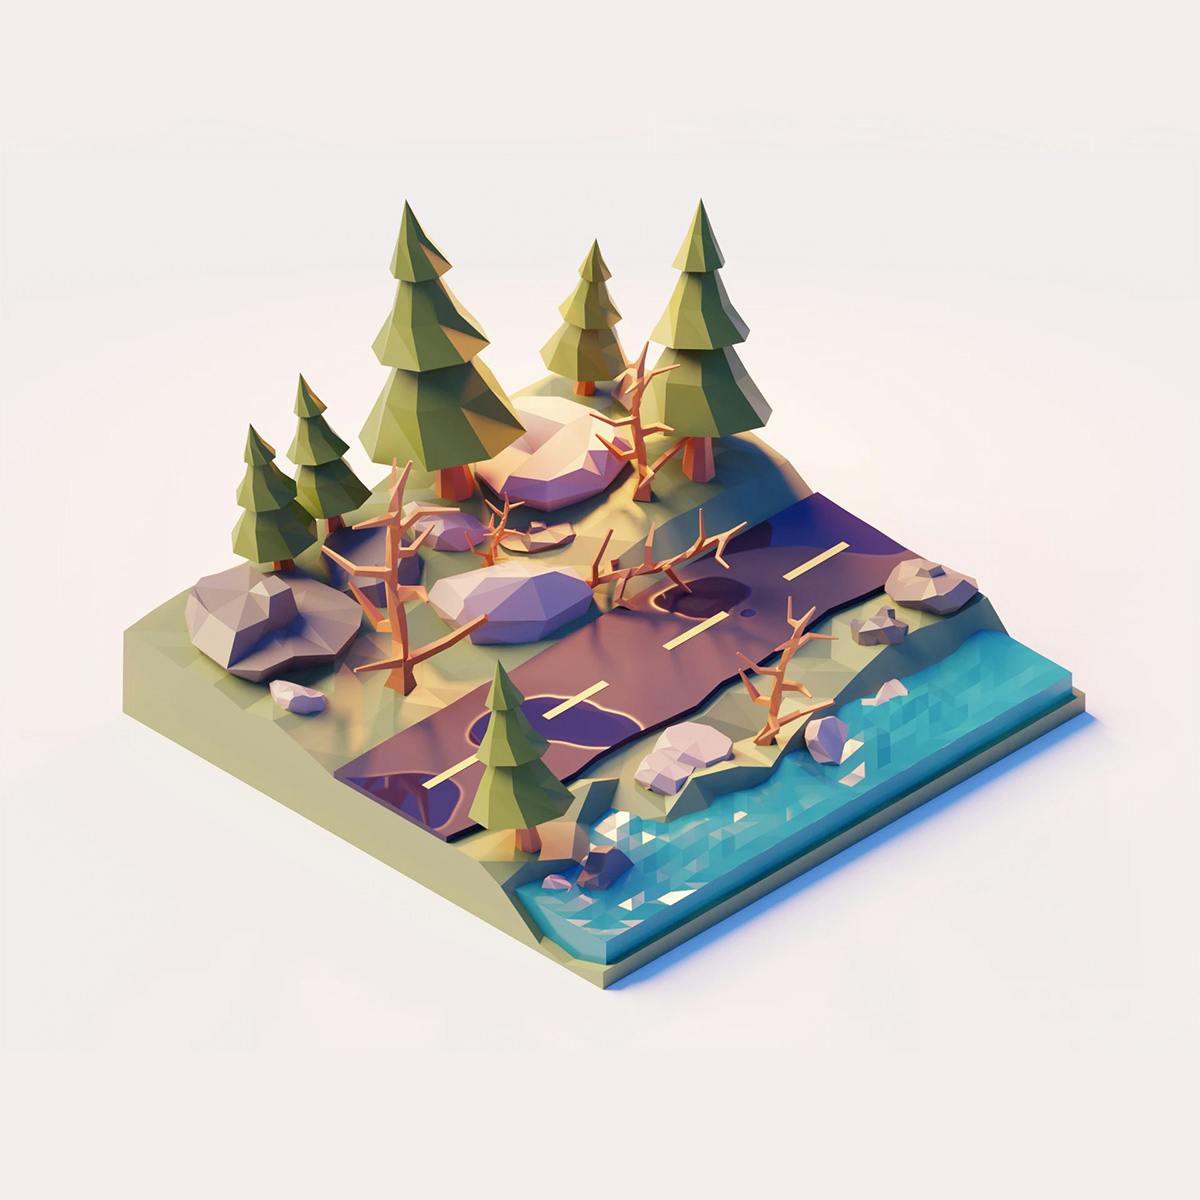 A 3D rendering of an isometric river road created by Ian Steele